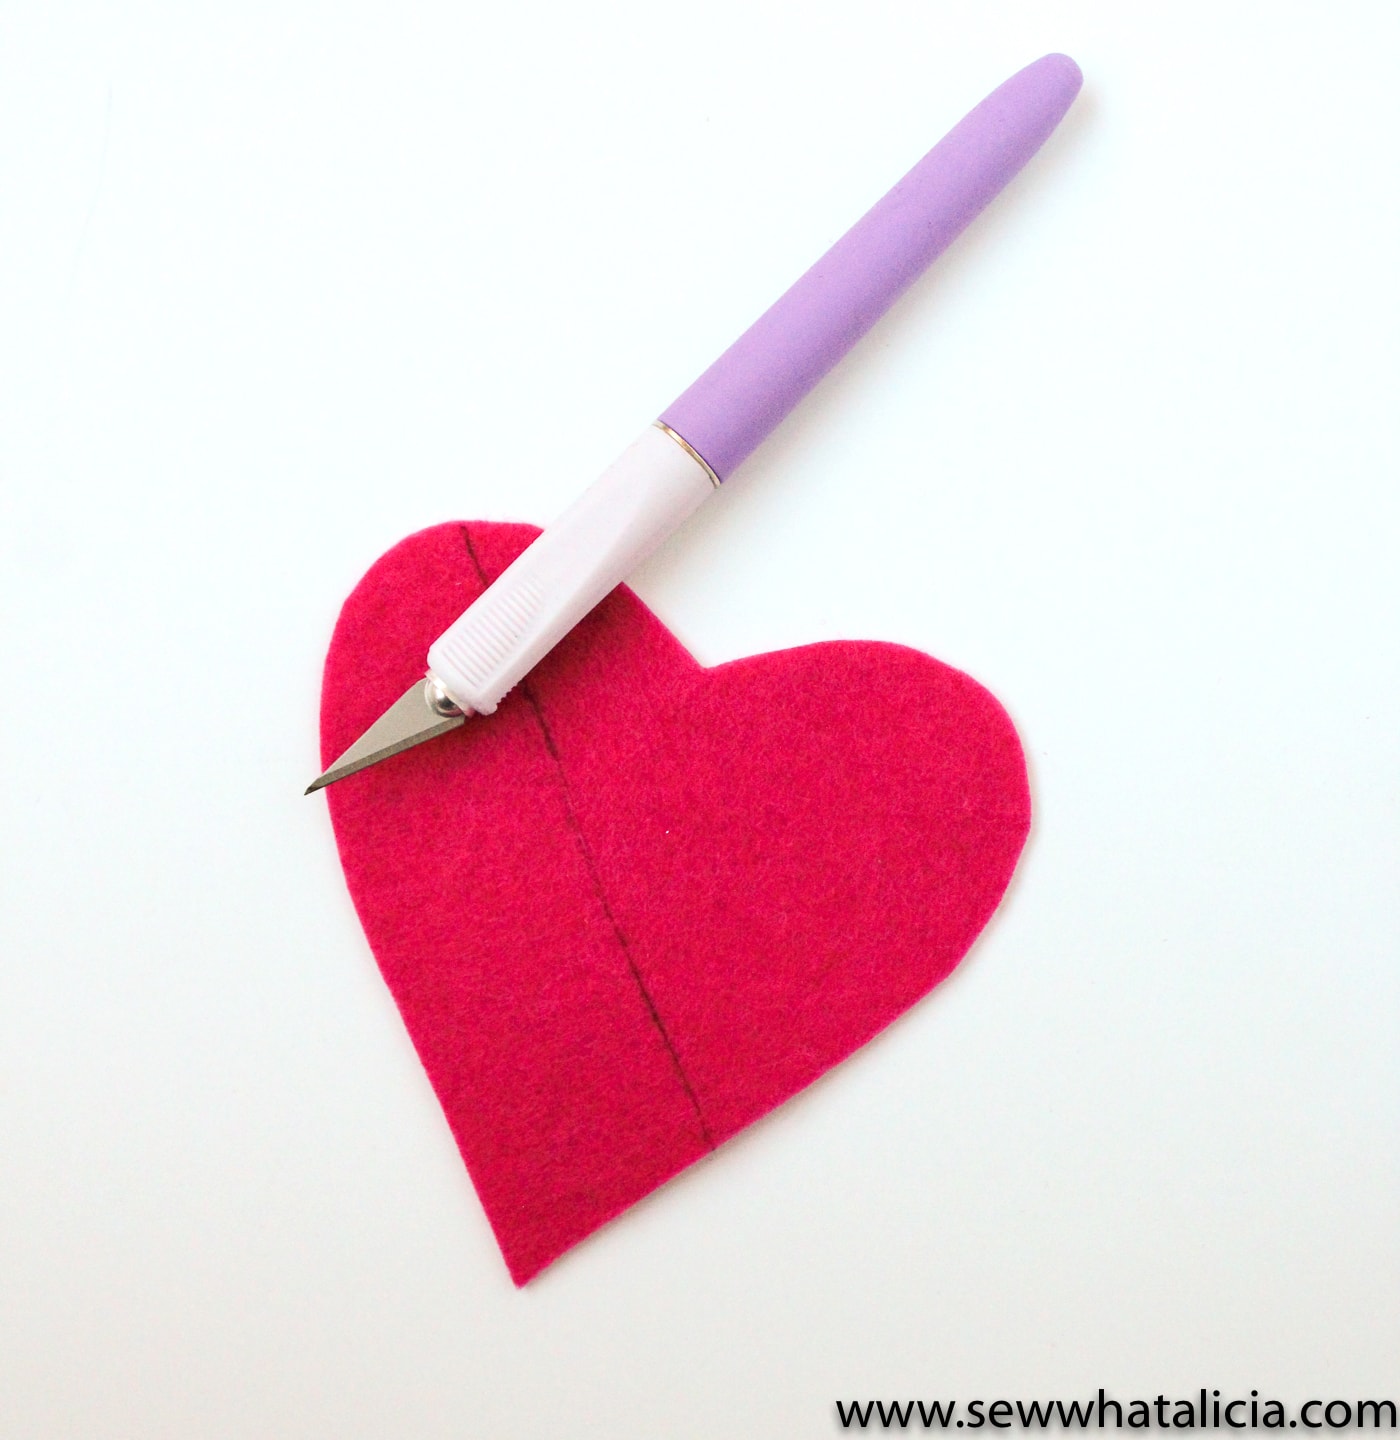 Felt Heart DIY Earbud Pouch - a free tutorial, makes a cute easy to make Valentine's Day gift. #earbudpouch #DIYearbudpouch #valentinesdaycrafts #valentinesdaygifts #diyvalentines #sewingproject #sewingpattern